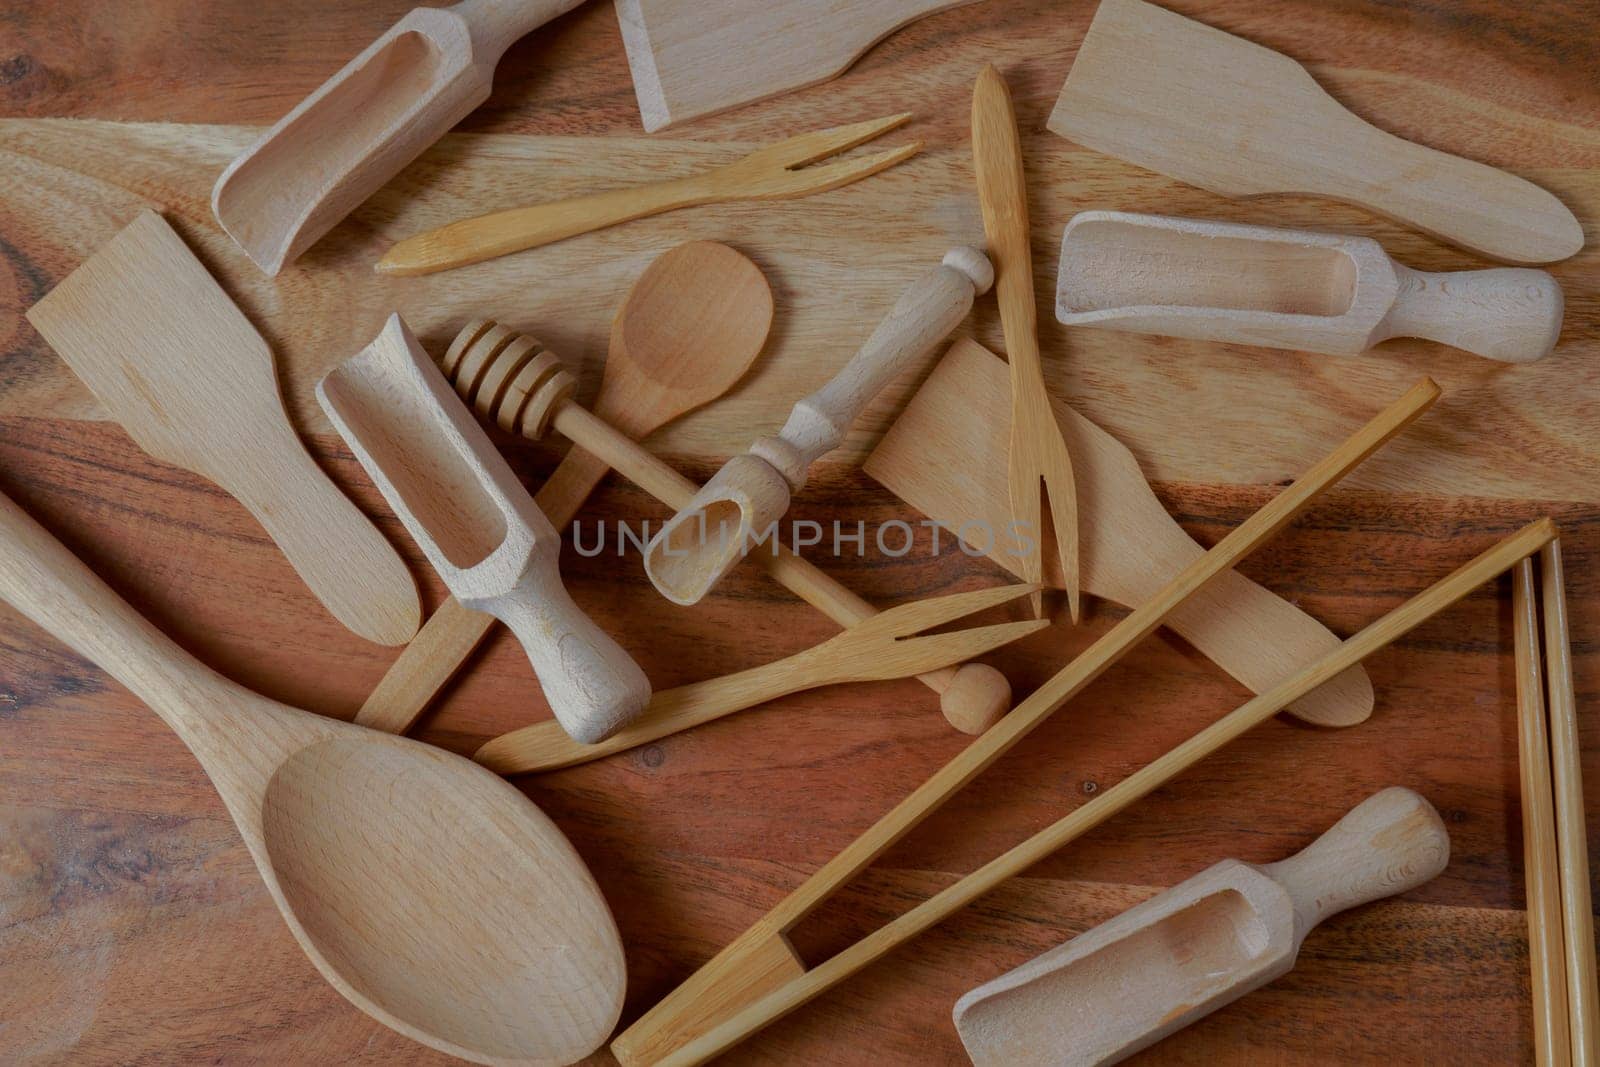 top view of a group of handmade wooden kitchen utensils